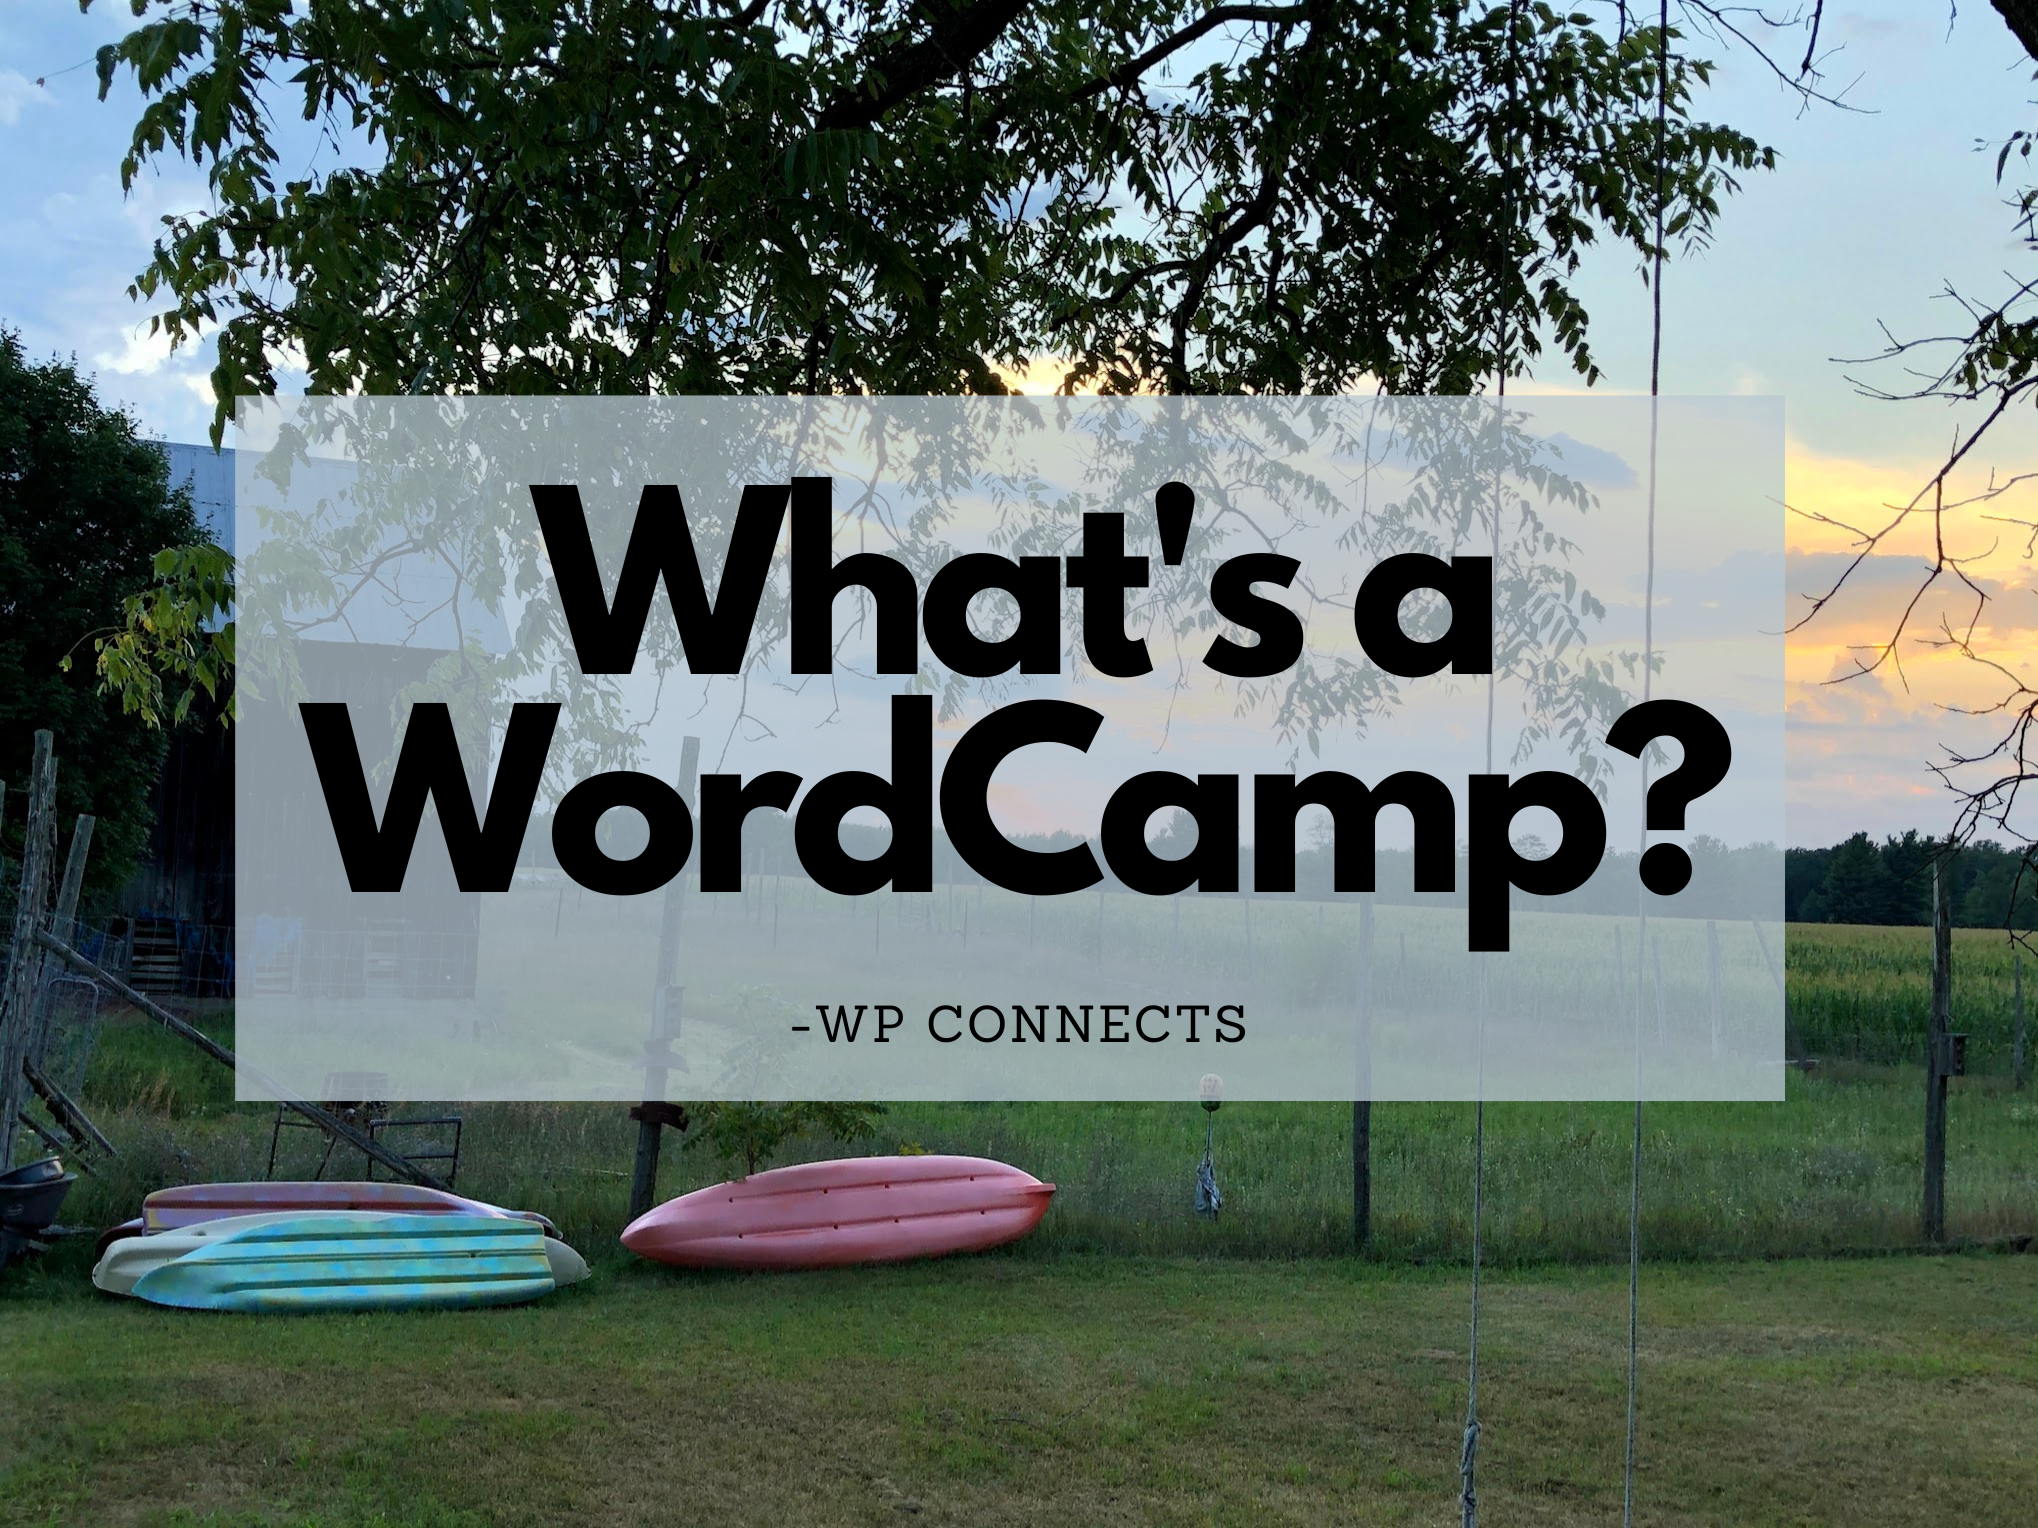 A yard in late summer with a barn in the background, a sunset behind that, and the words "What's a WordCamp?" in a text box.